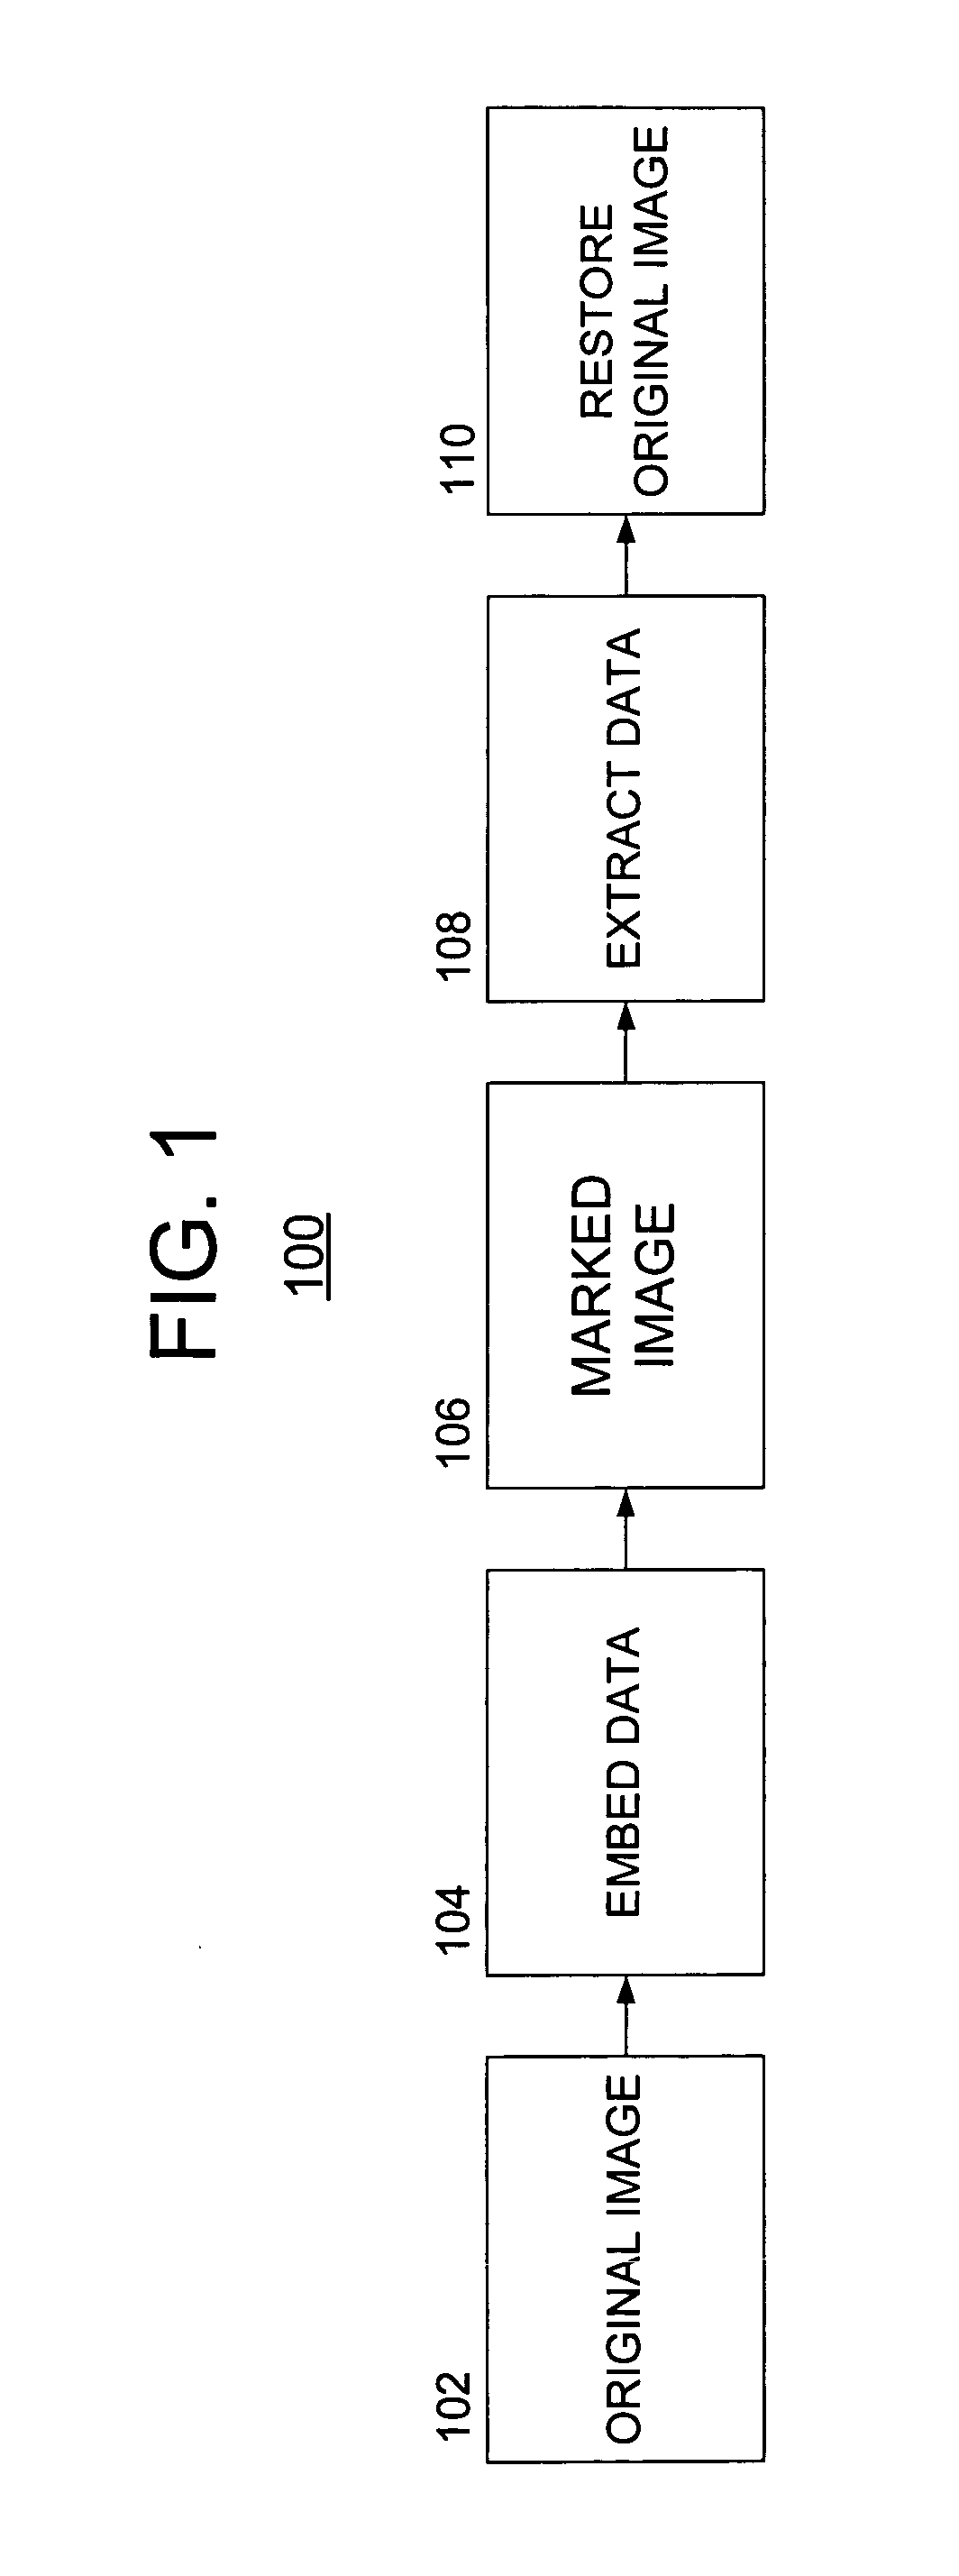 System and method for lossless data hiding using the integer wavelet transform